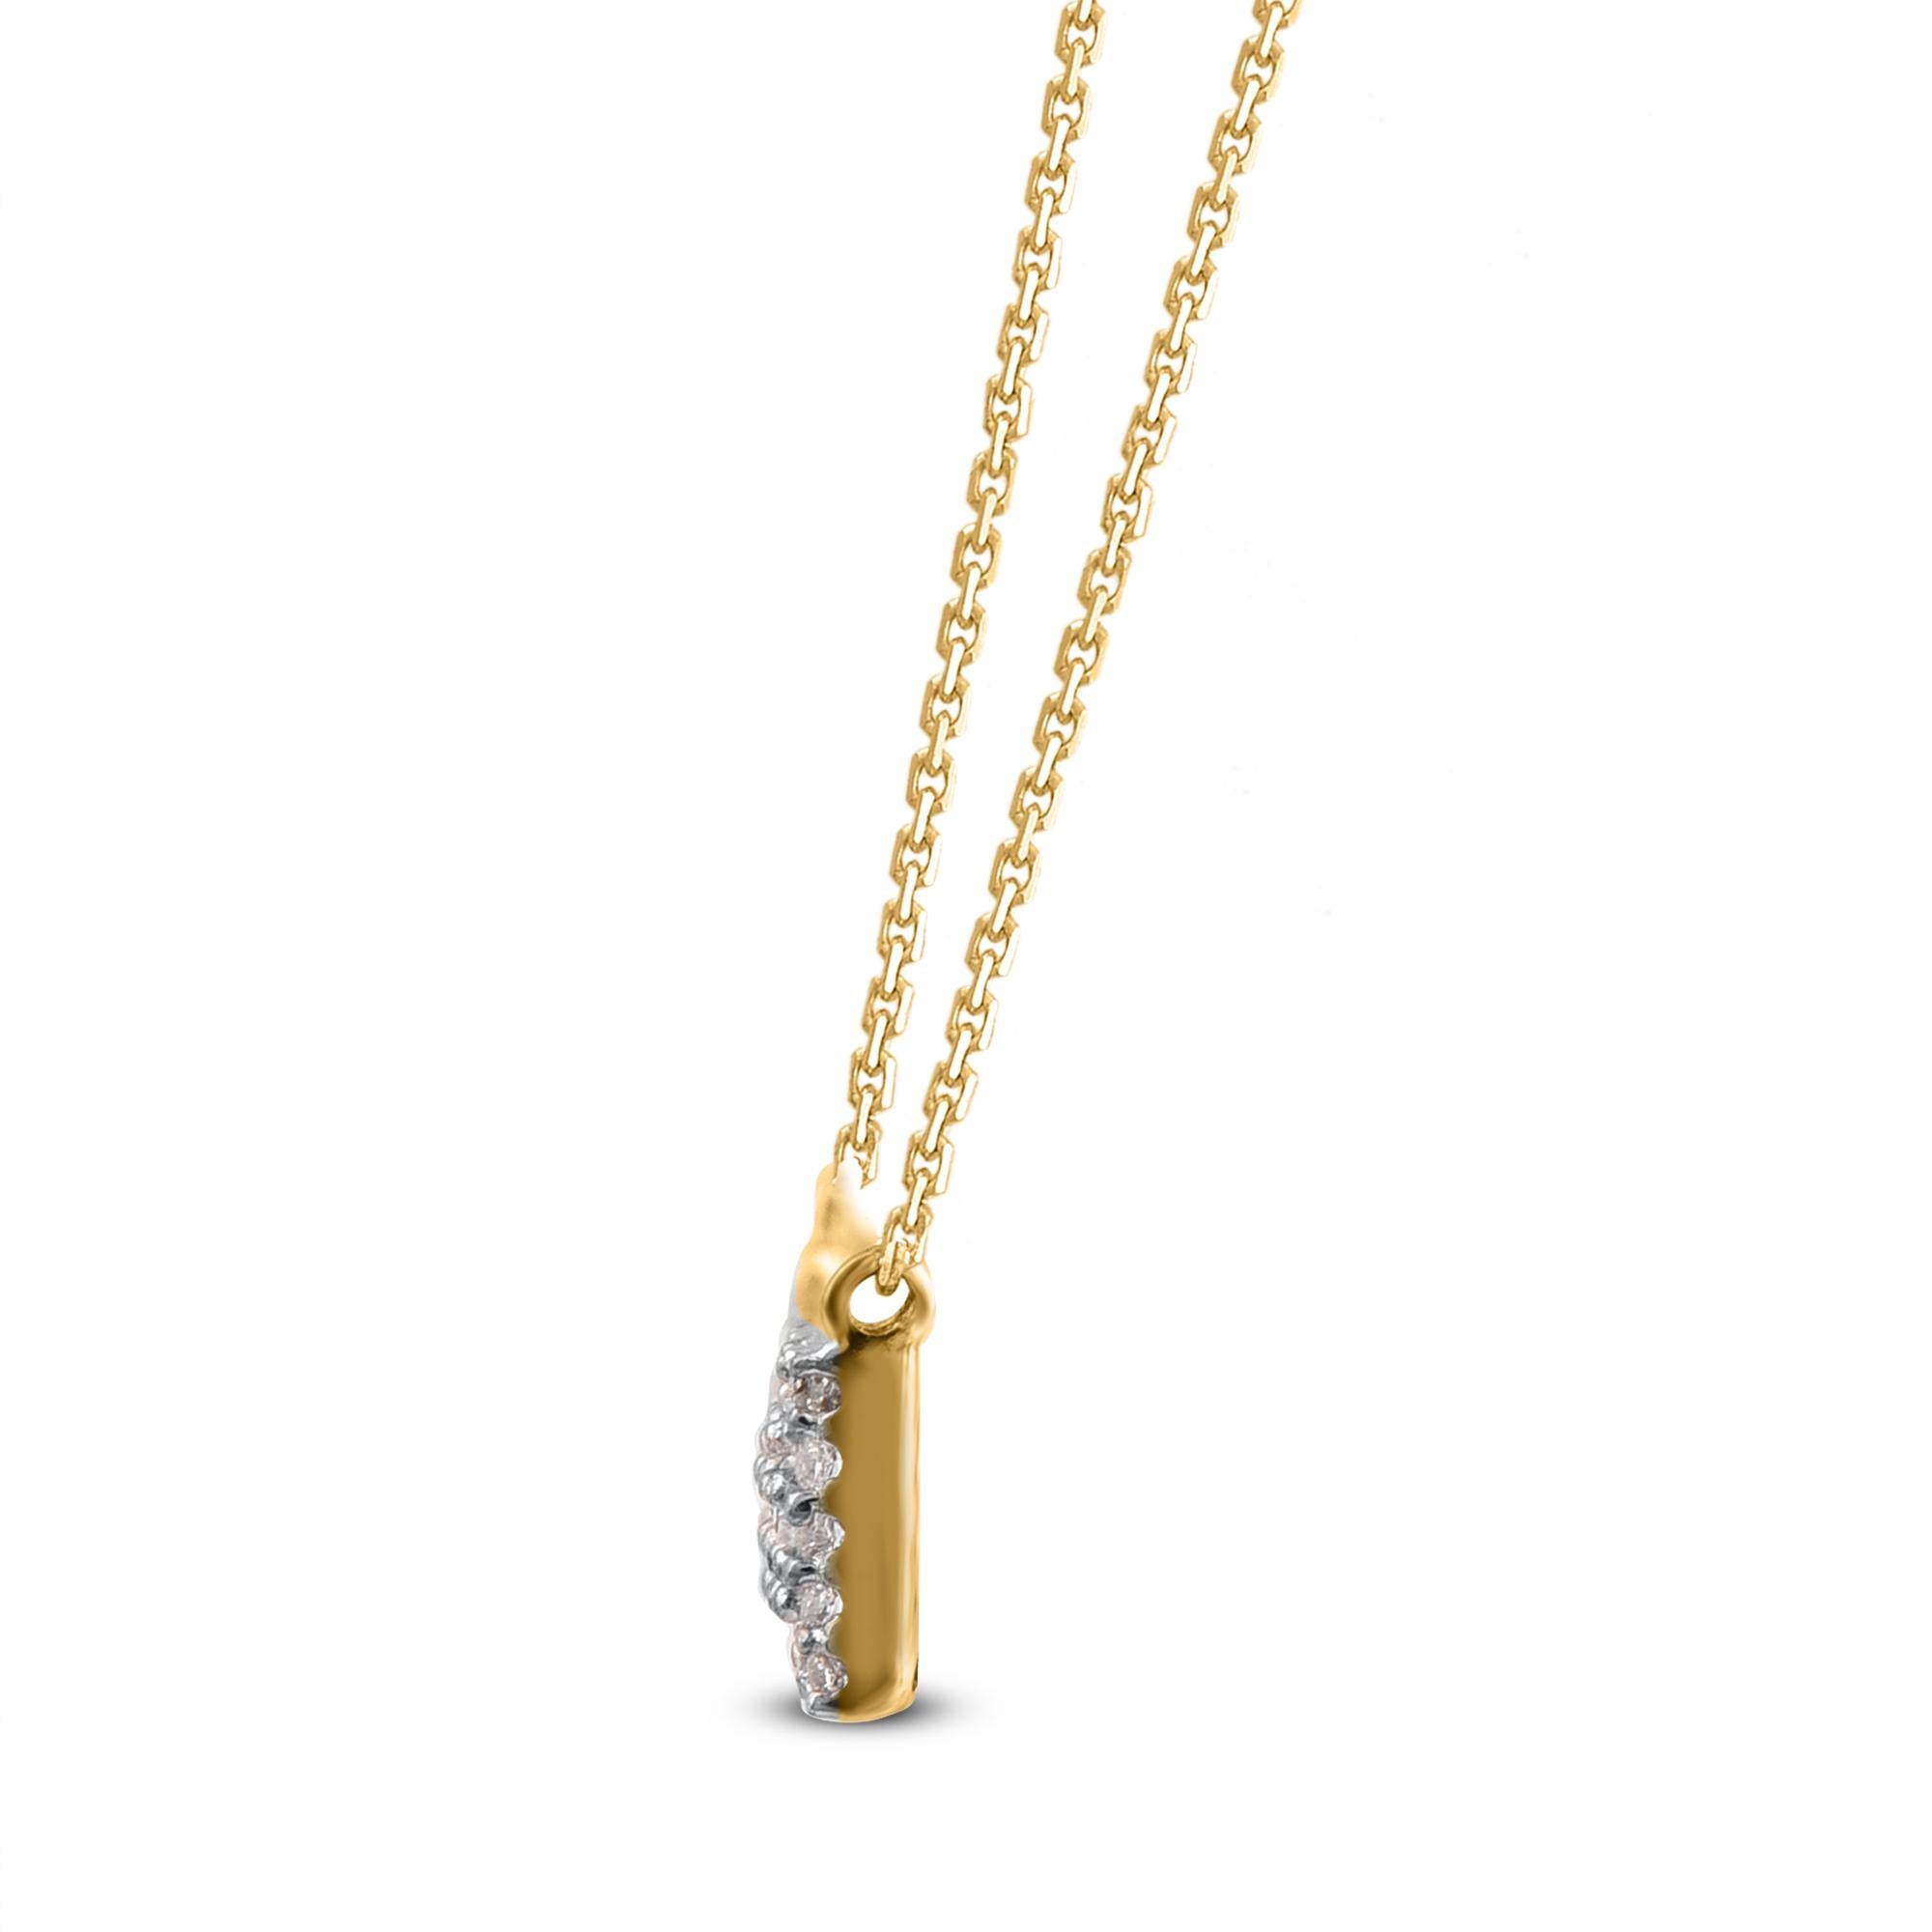 Chic and shimmering, necklace created in 18K yellow gold, this horizontal bar pendant features 74 channel-set baguette-cut diamonds bordered in round diamonds. Diamonds are graded as H-I color and I-2 clarity. Necklace suspends along an cable chain